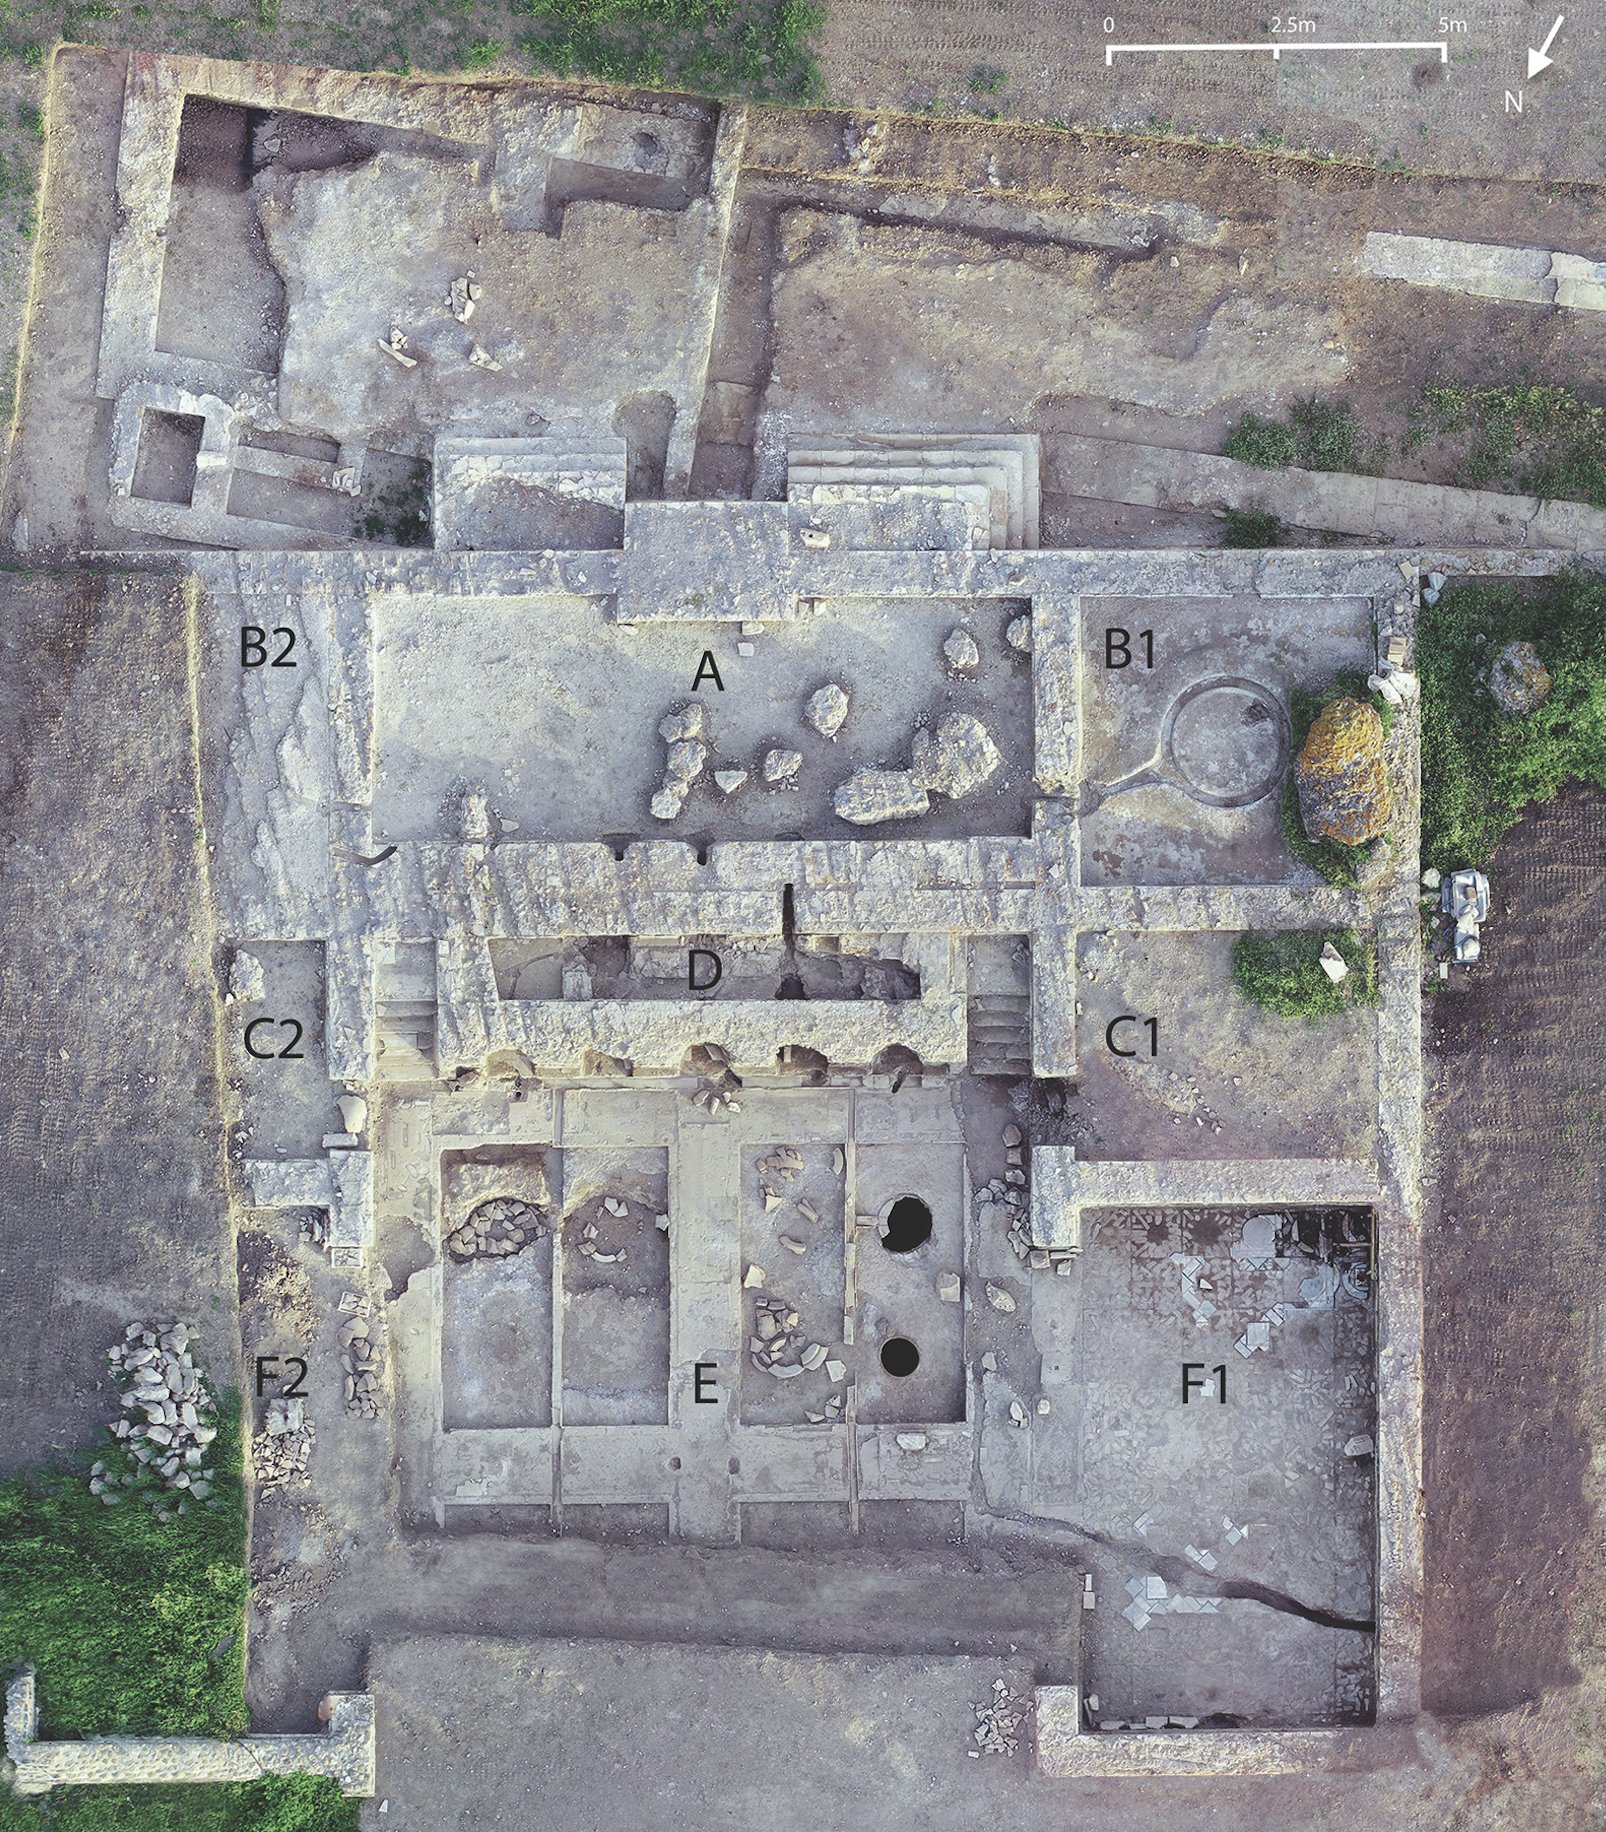 An aerial photograph of the Villa of the Quintilii. (Image: M.C.M s.r.l, modified from Frontoni et al. 2020: fig. 3)